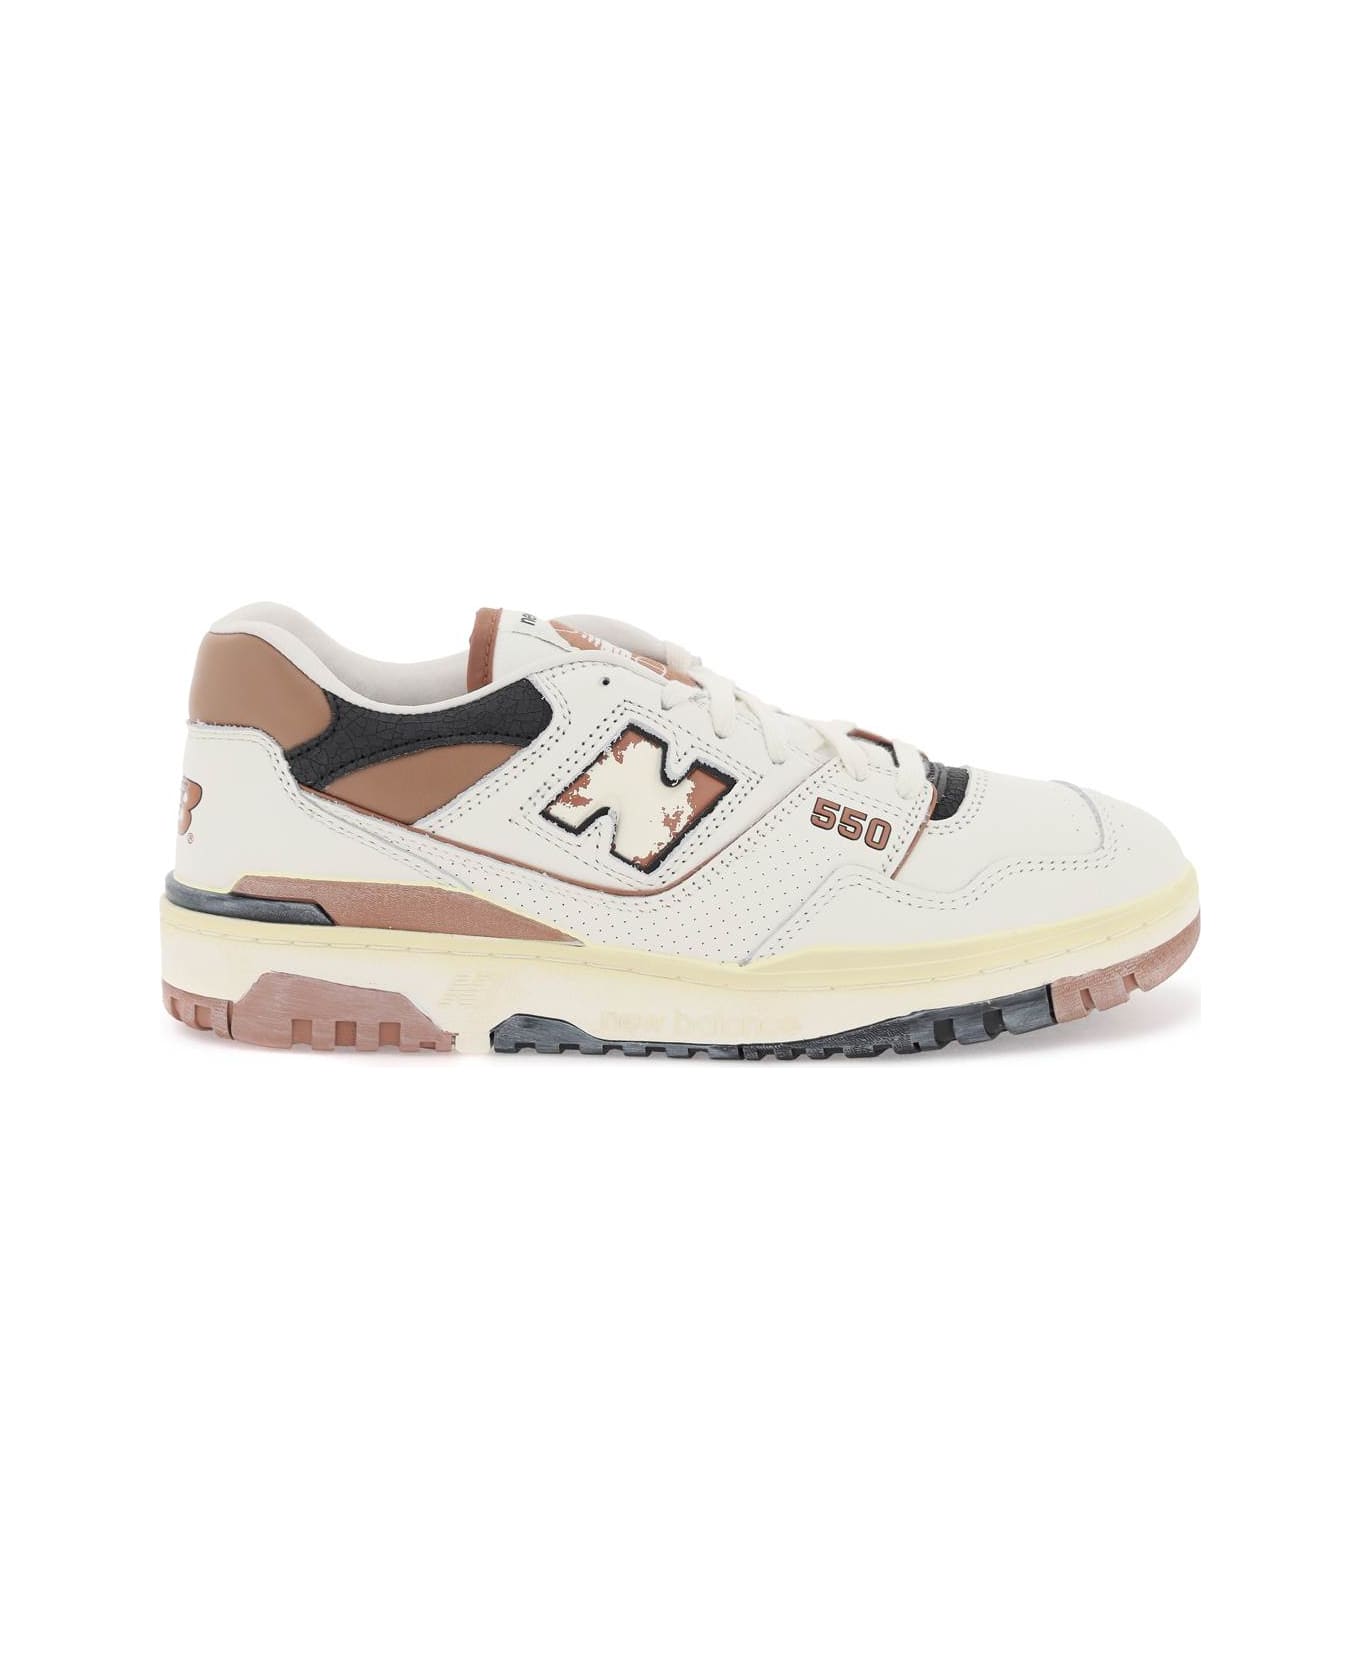 New Balance Vintage-effect 550 Sneakers - OFF WHITE BROWN (White) スニーカー